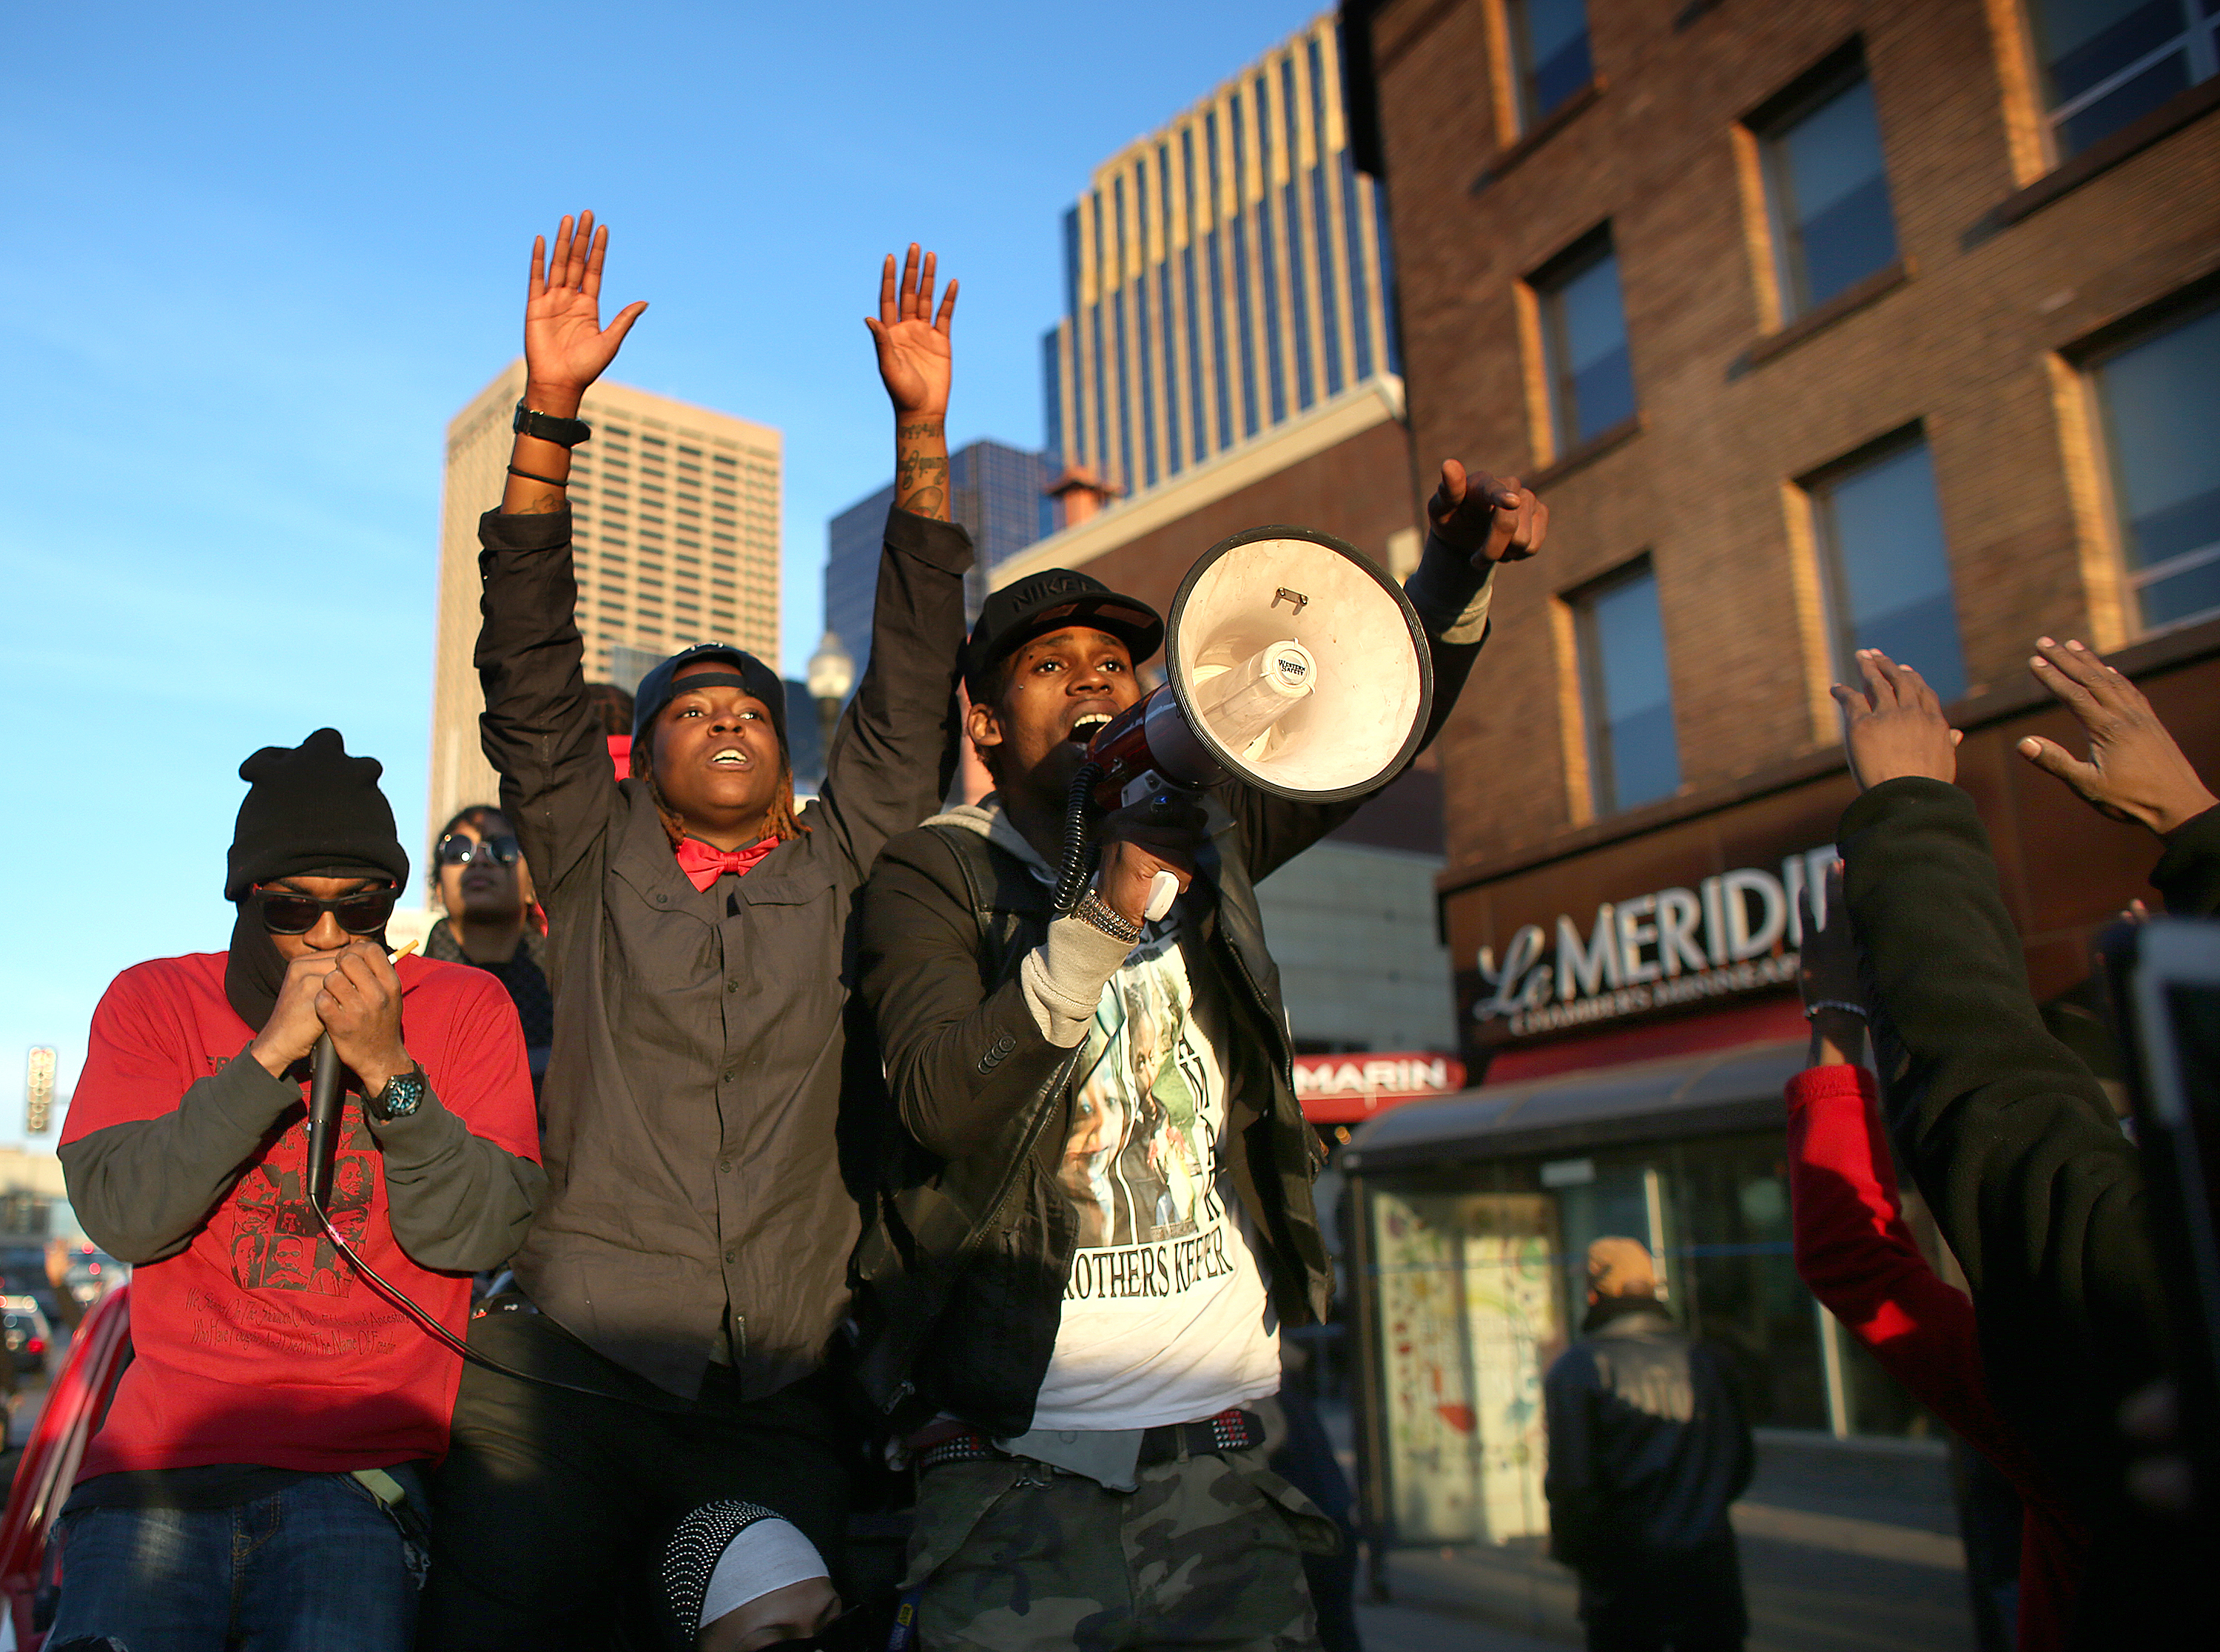 Alexander Clark lead the chants as more than 1000 protesters headed to the federal court house. ] (KYNDELL HARKNESS/STAR TRIBUNE) kyndell.harkness@startribune.com Protesters at the Minneapolis Fourth Precinct in Minneapolis Min., Saturday November 24, 2015.